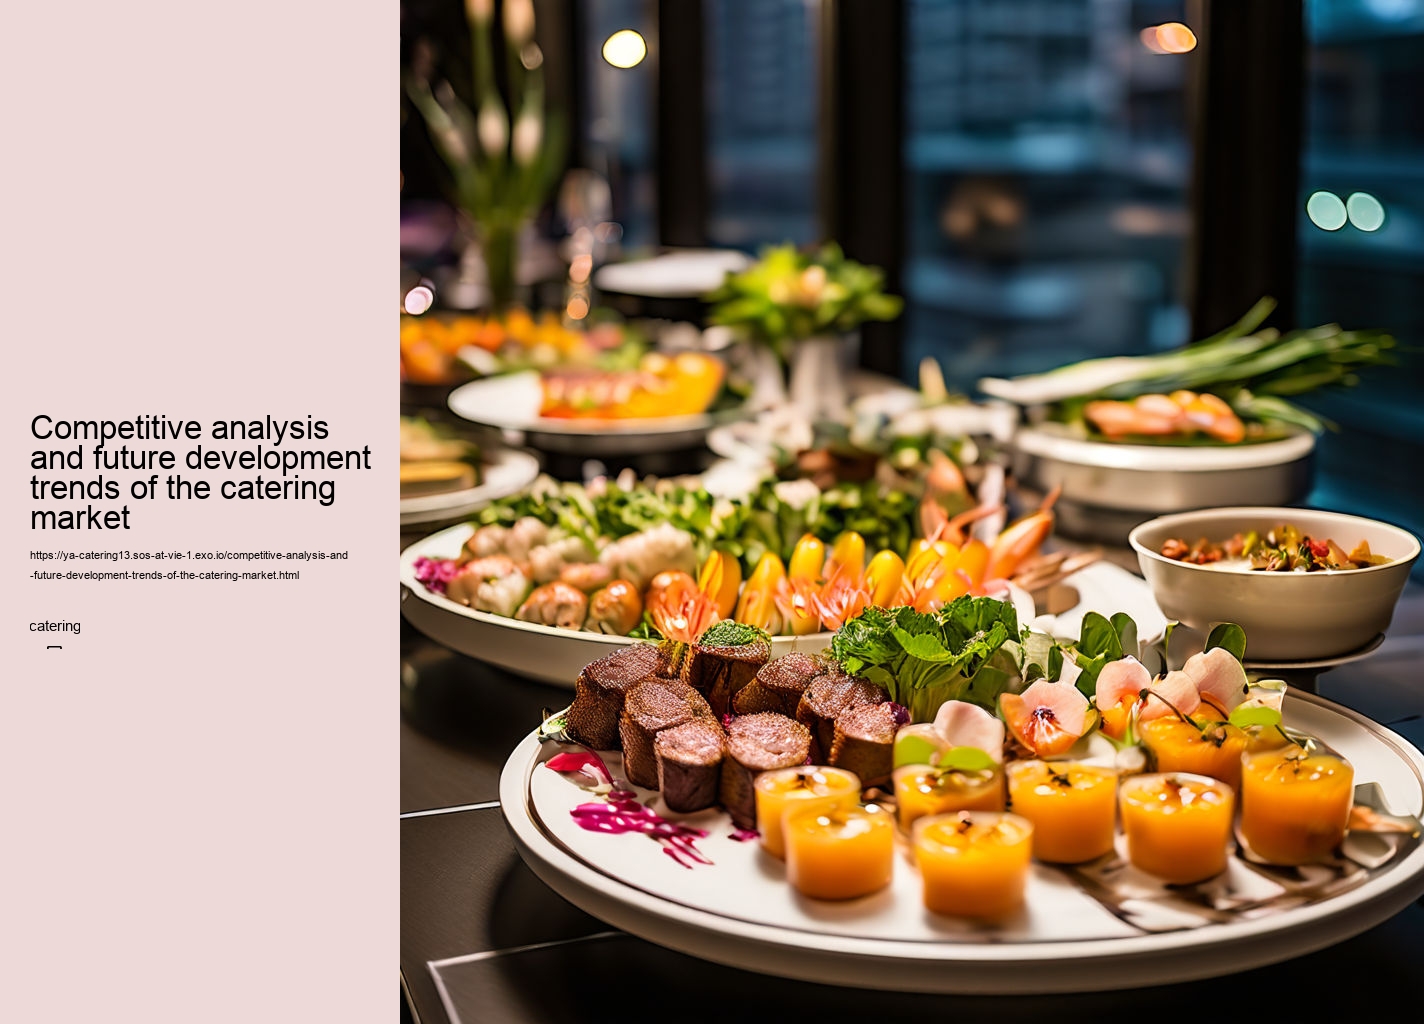 Competitive analysis and future development trends of the catering market